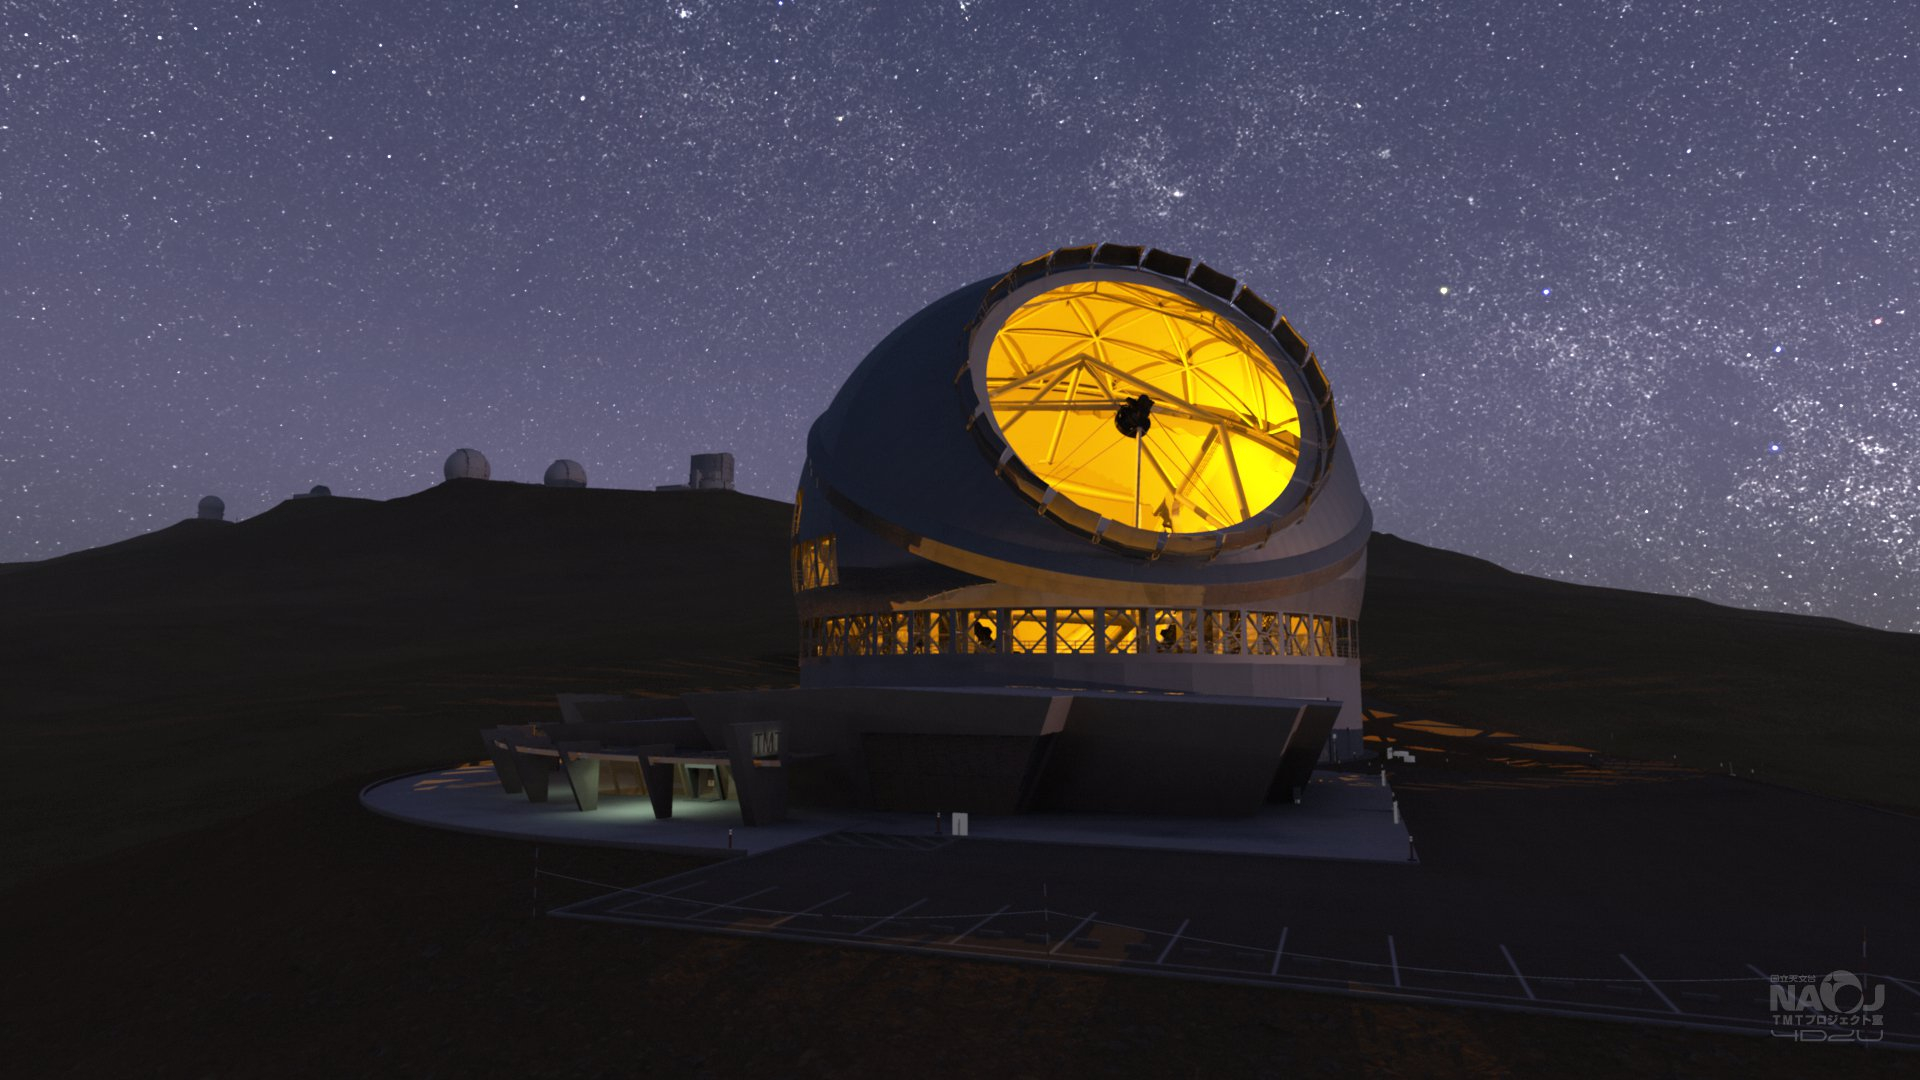 1920x1080 A Next Generation Extremely Large Telescope: TMT | NAOJ: National Astronomical Observatory of Japan English